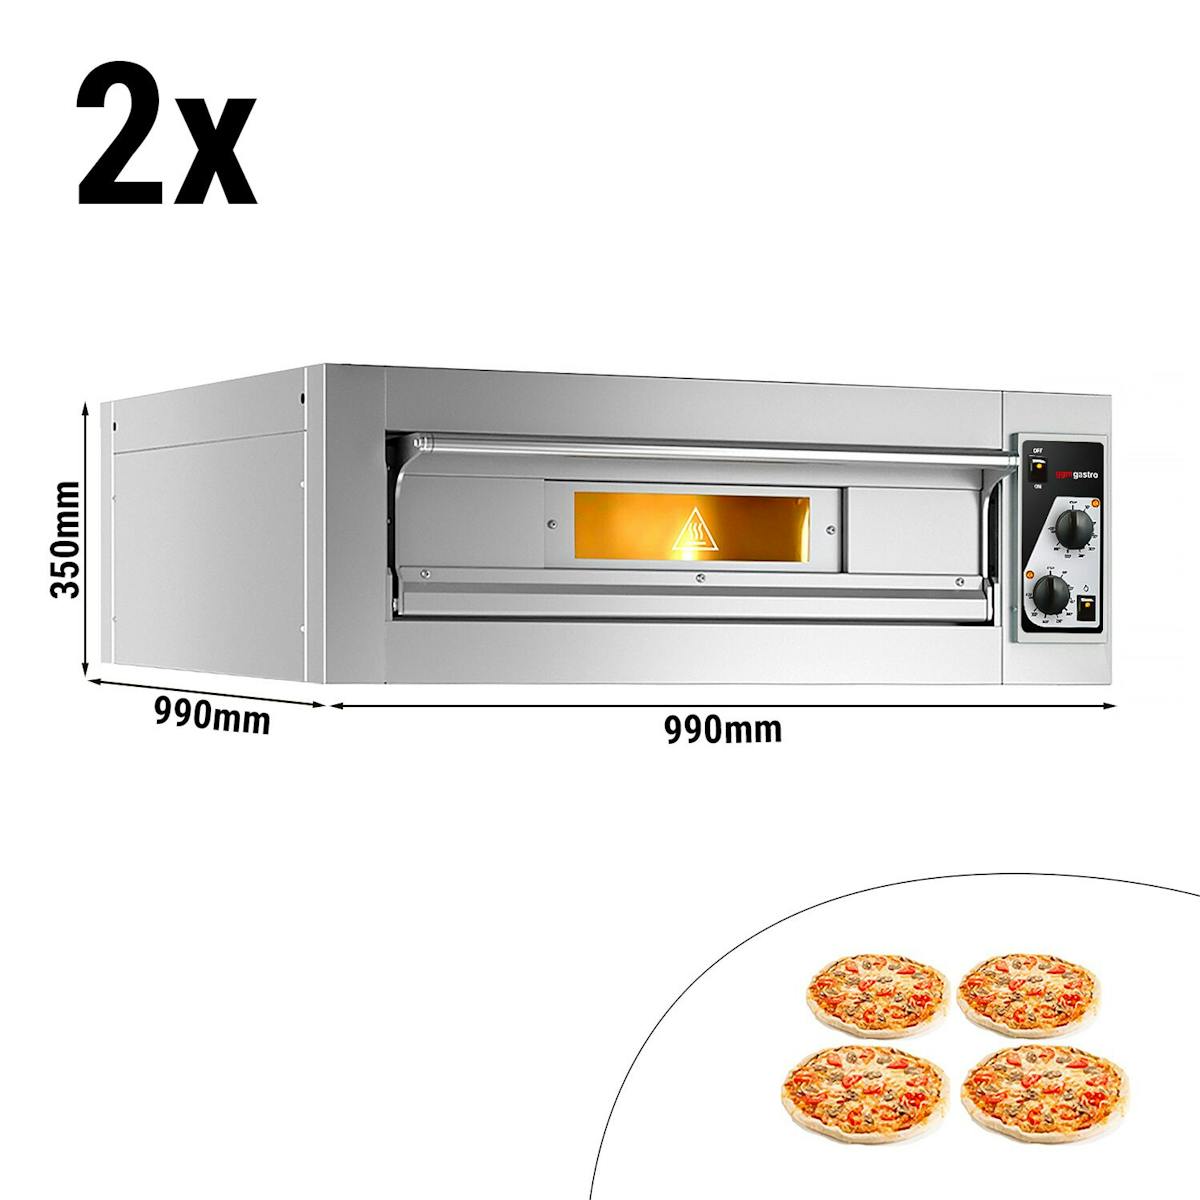 (2 pieces) Electric pizza oven - 4+4x 33 cm - Manual